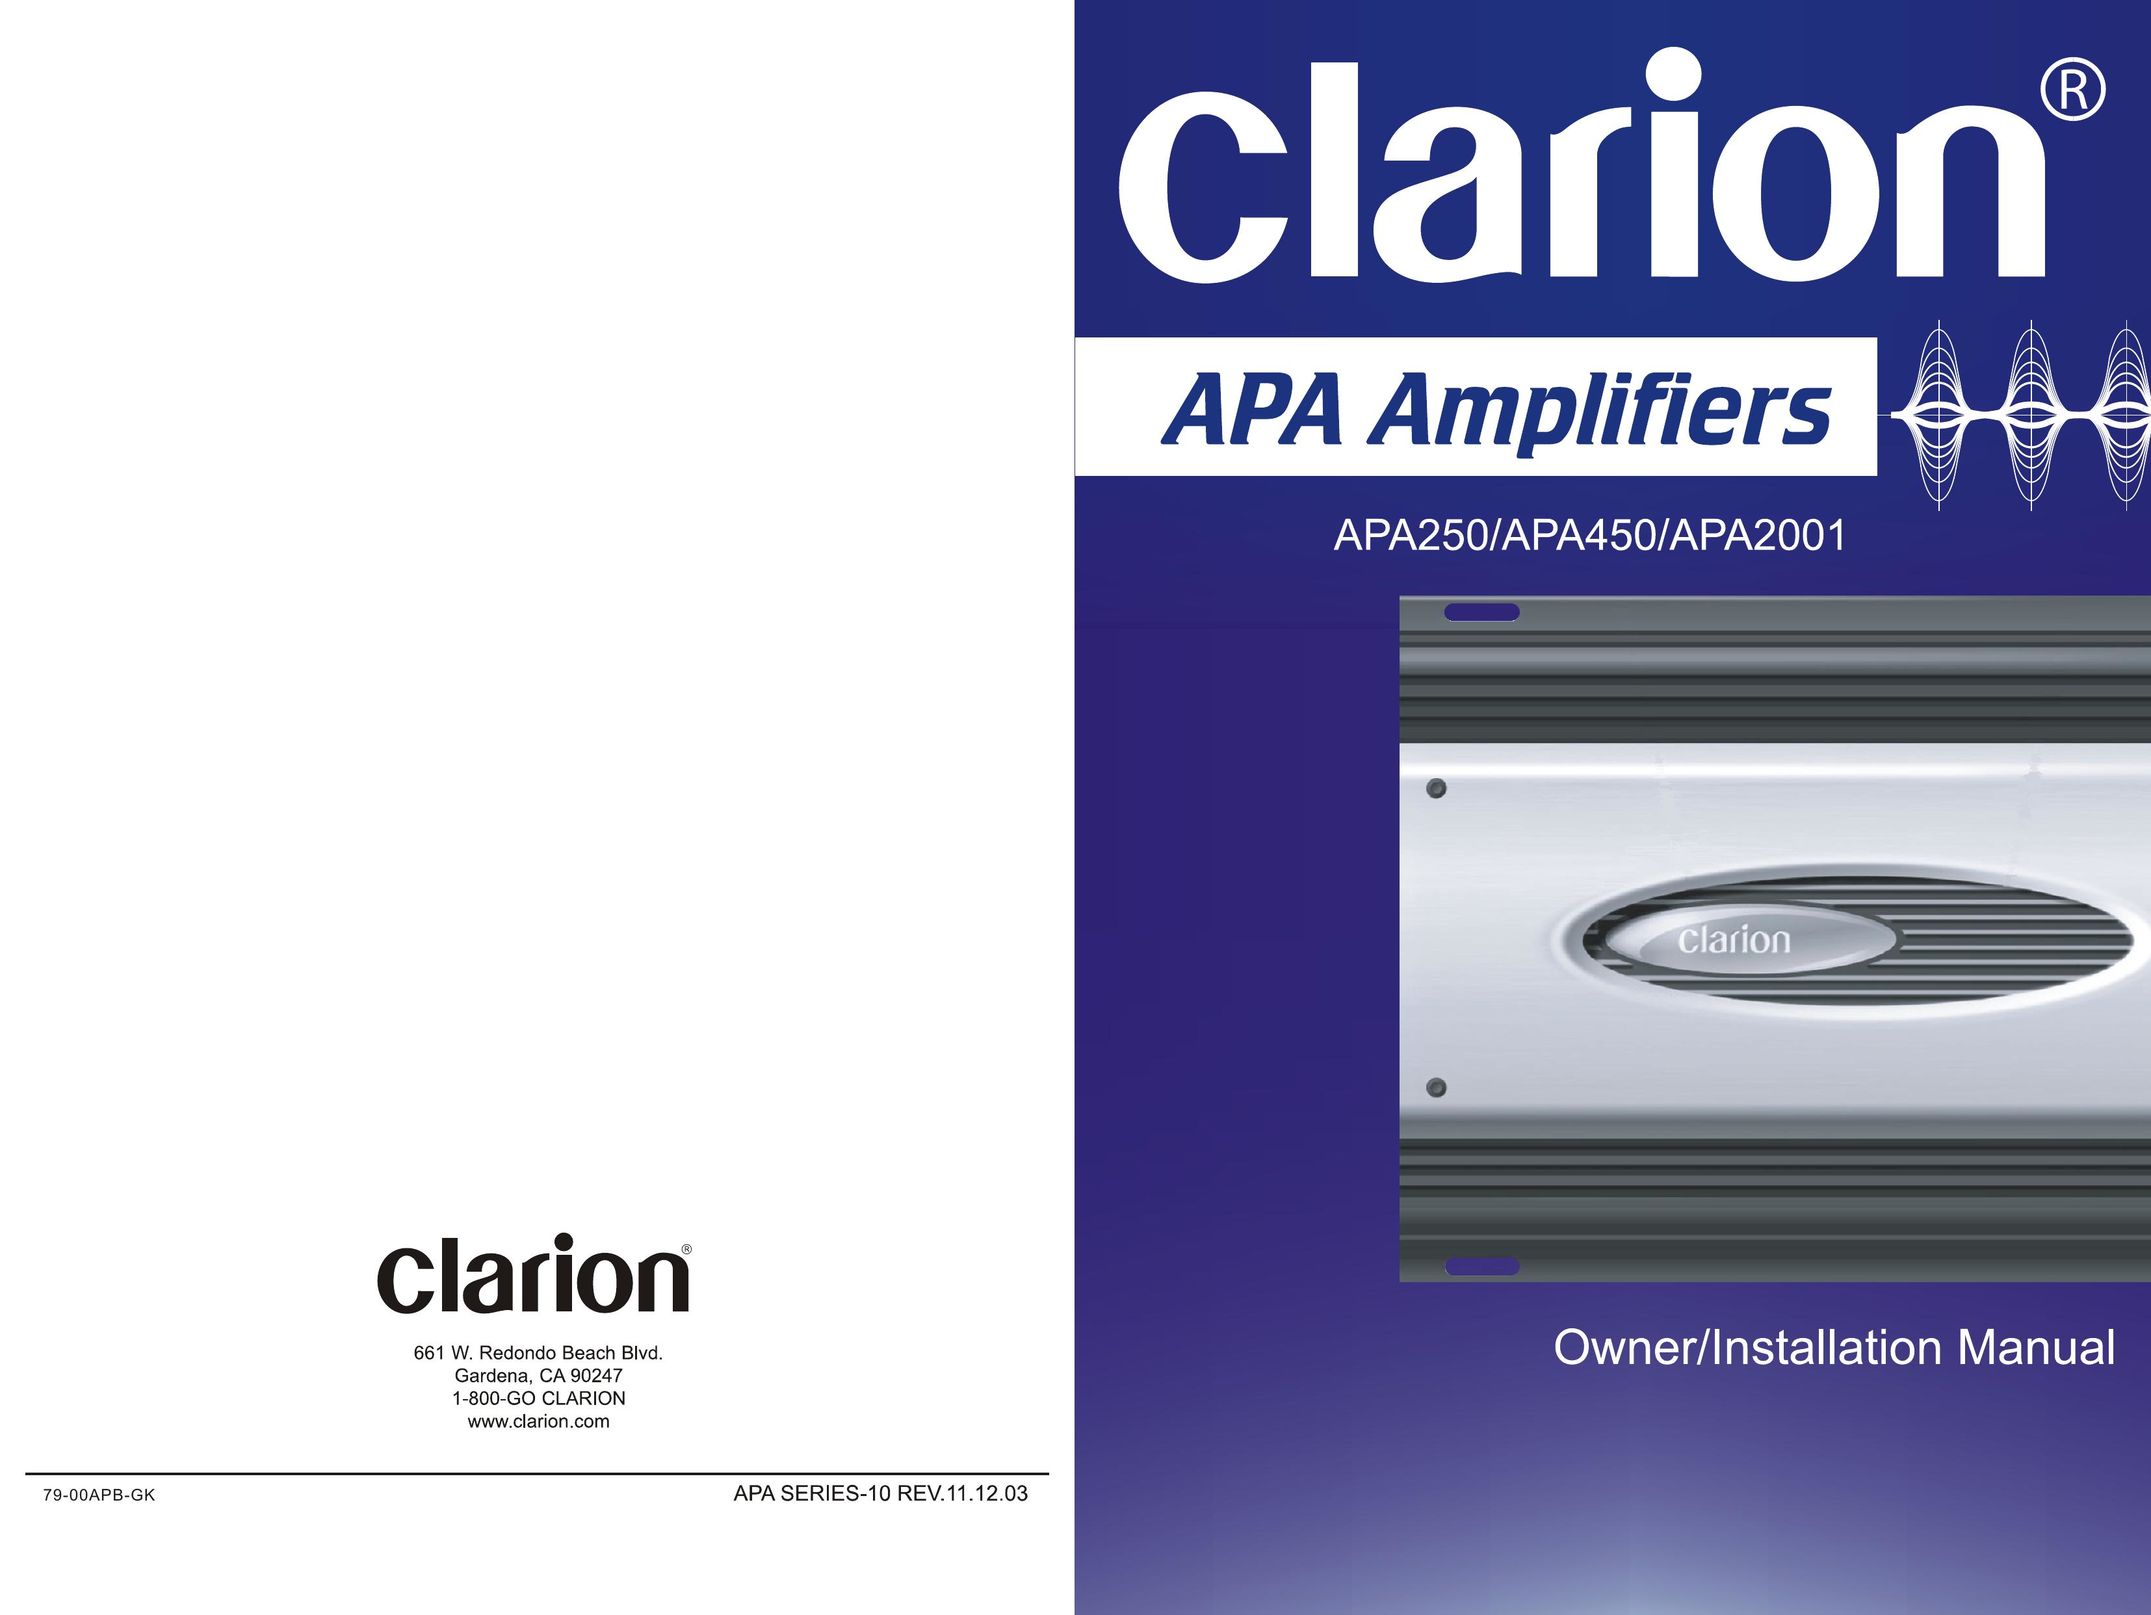 Clarion APA450 Car Stereo System User Manual